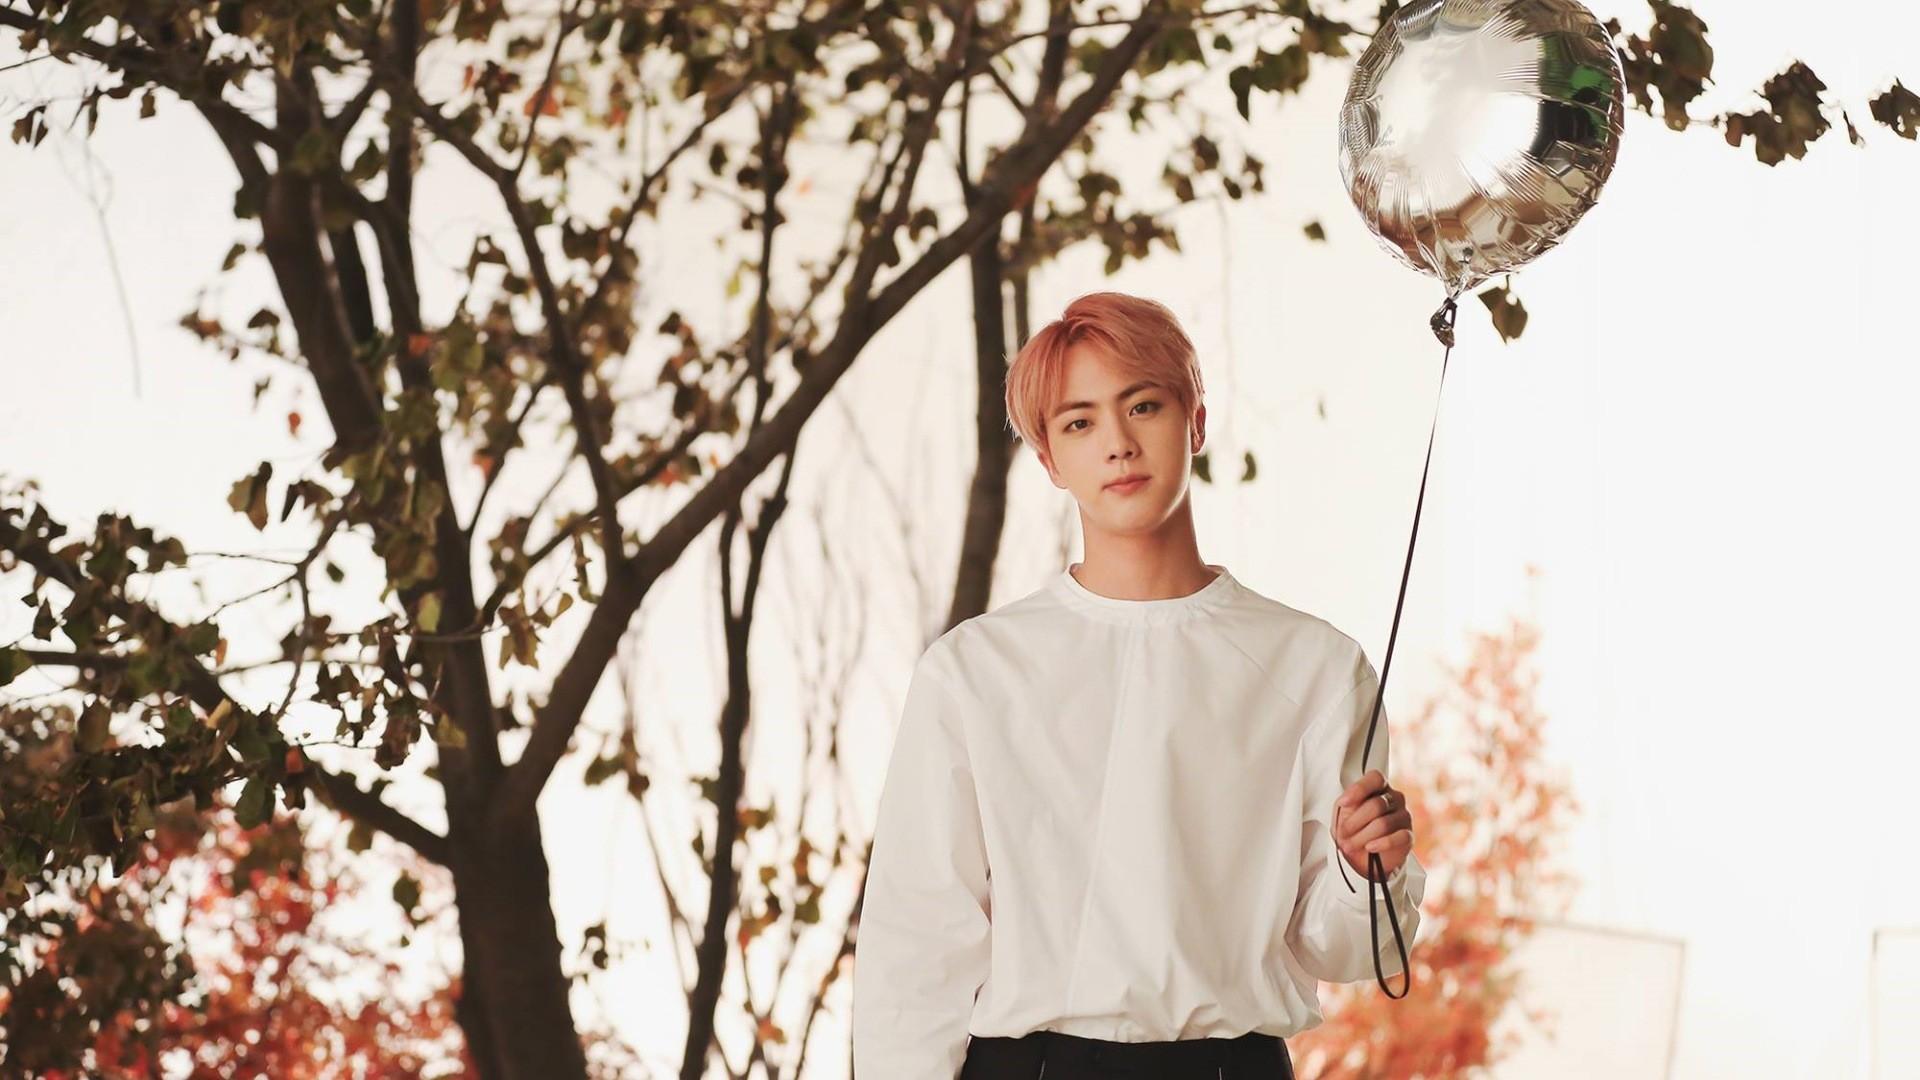 Jin From K Pop Superband BTS: His Past, His Private Thoughts